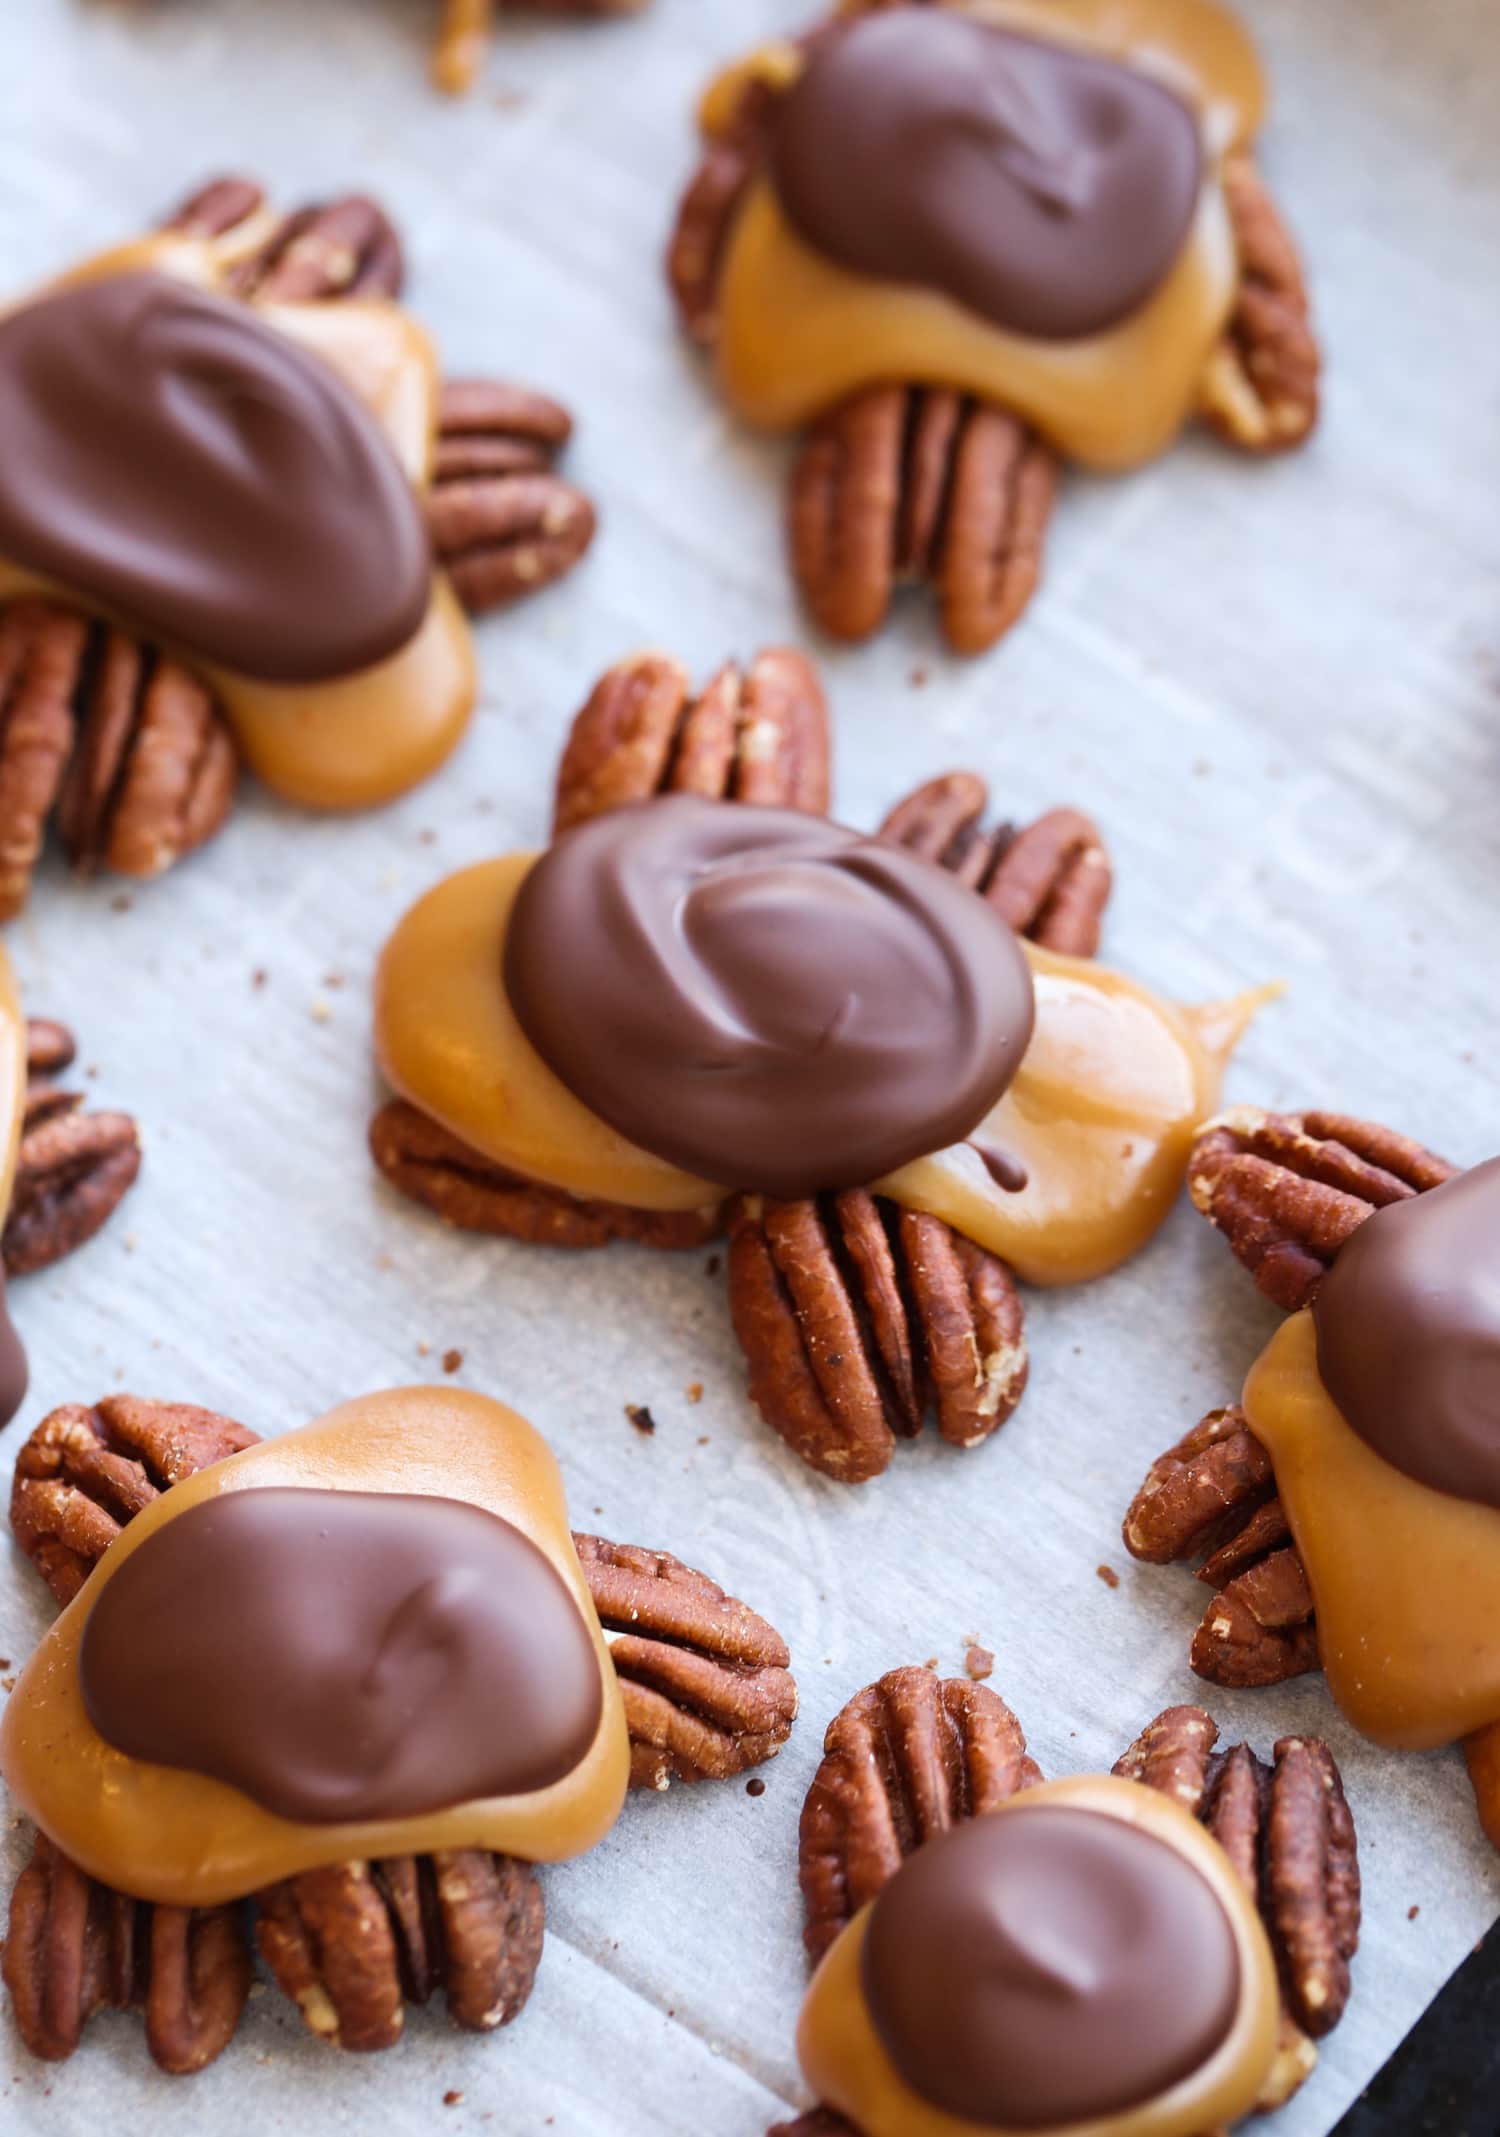 Cooled chocolate on caramel pecans.